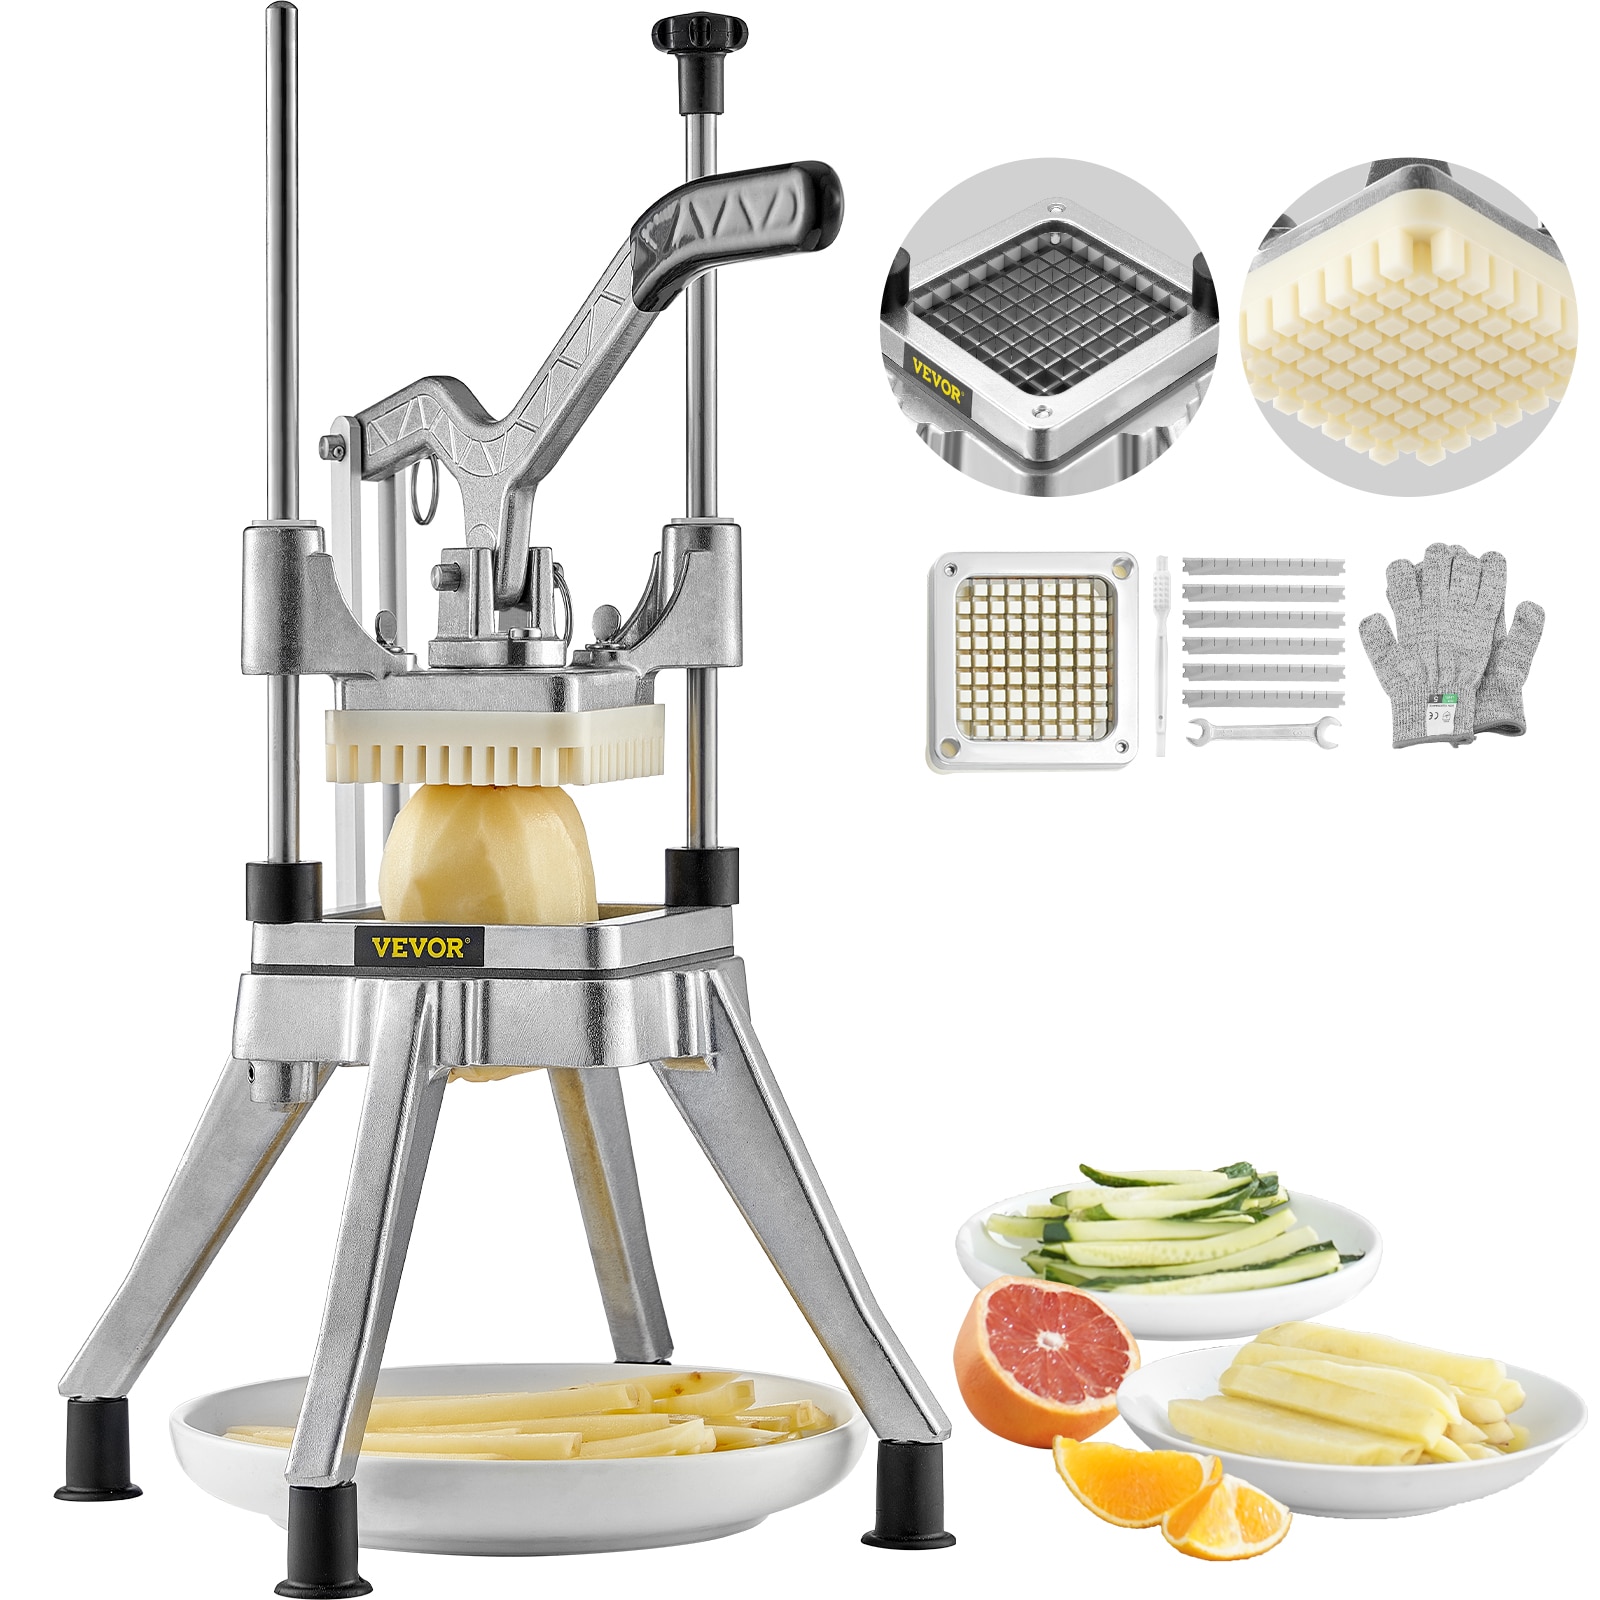 VEVOR Commercial Grade Stainless Steel Food Slicer - Silver, 0.3-in Blade, Cuts Meat, Cheese, Vegetables - High-Pressure Die-Cast Aluminum Frame